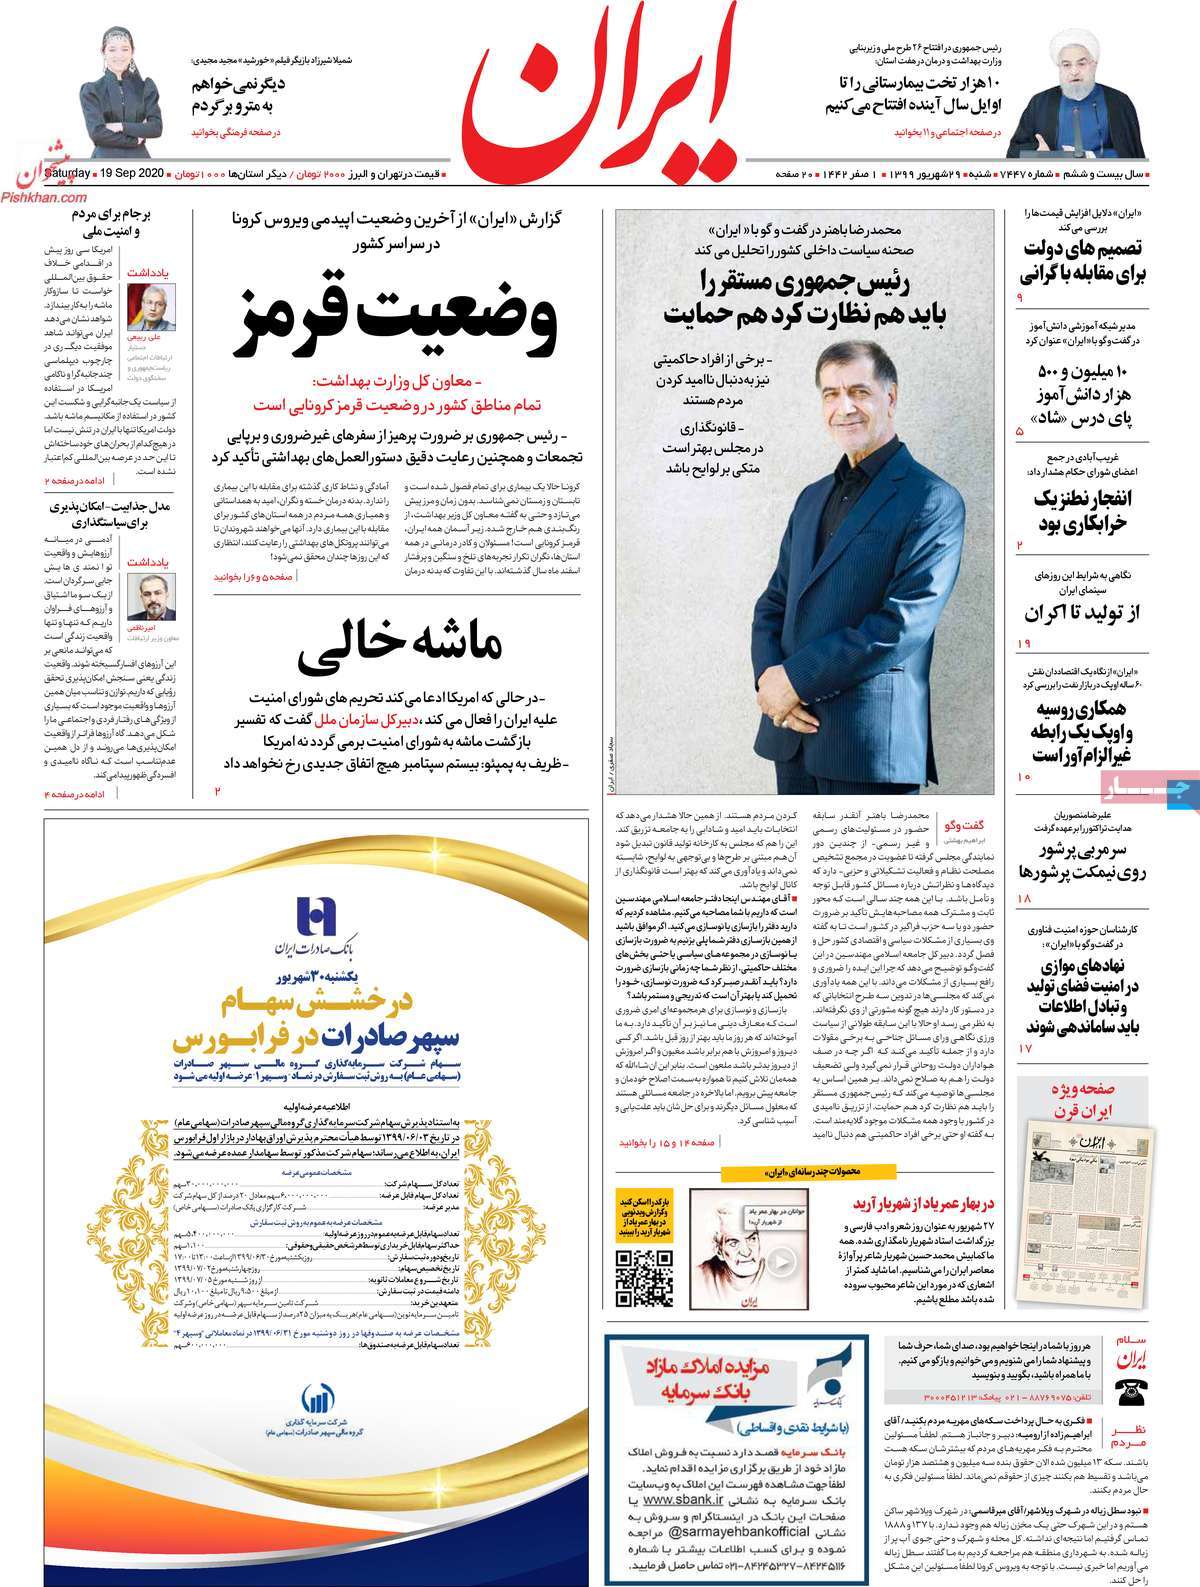 A Look at Iranian Newspaper Front Pages on September 19